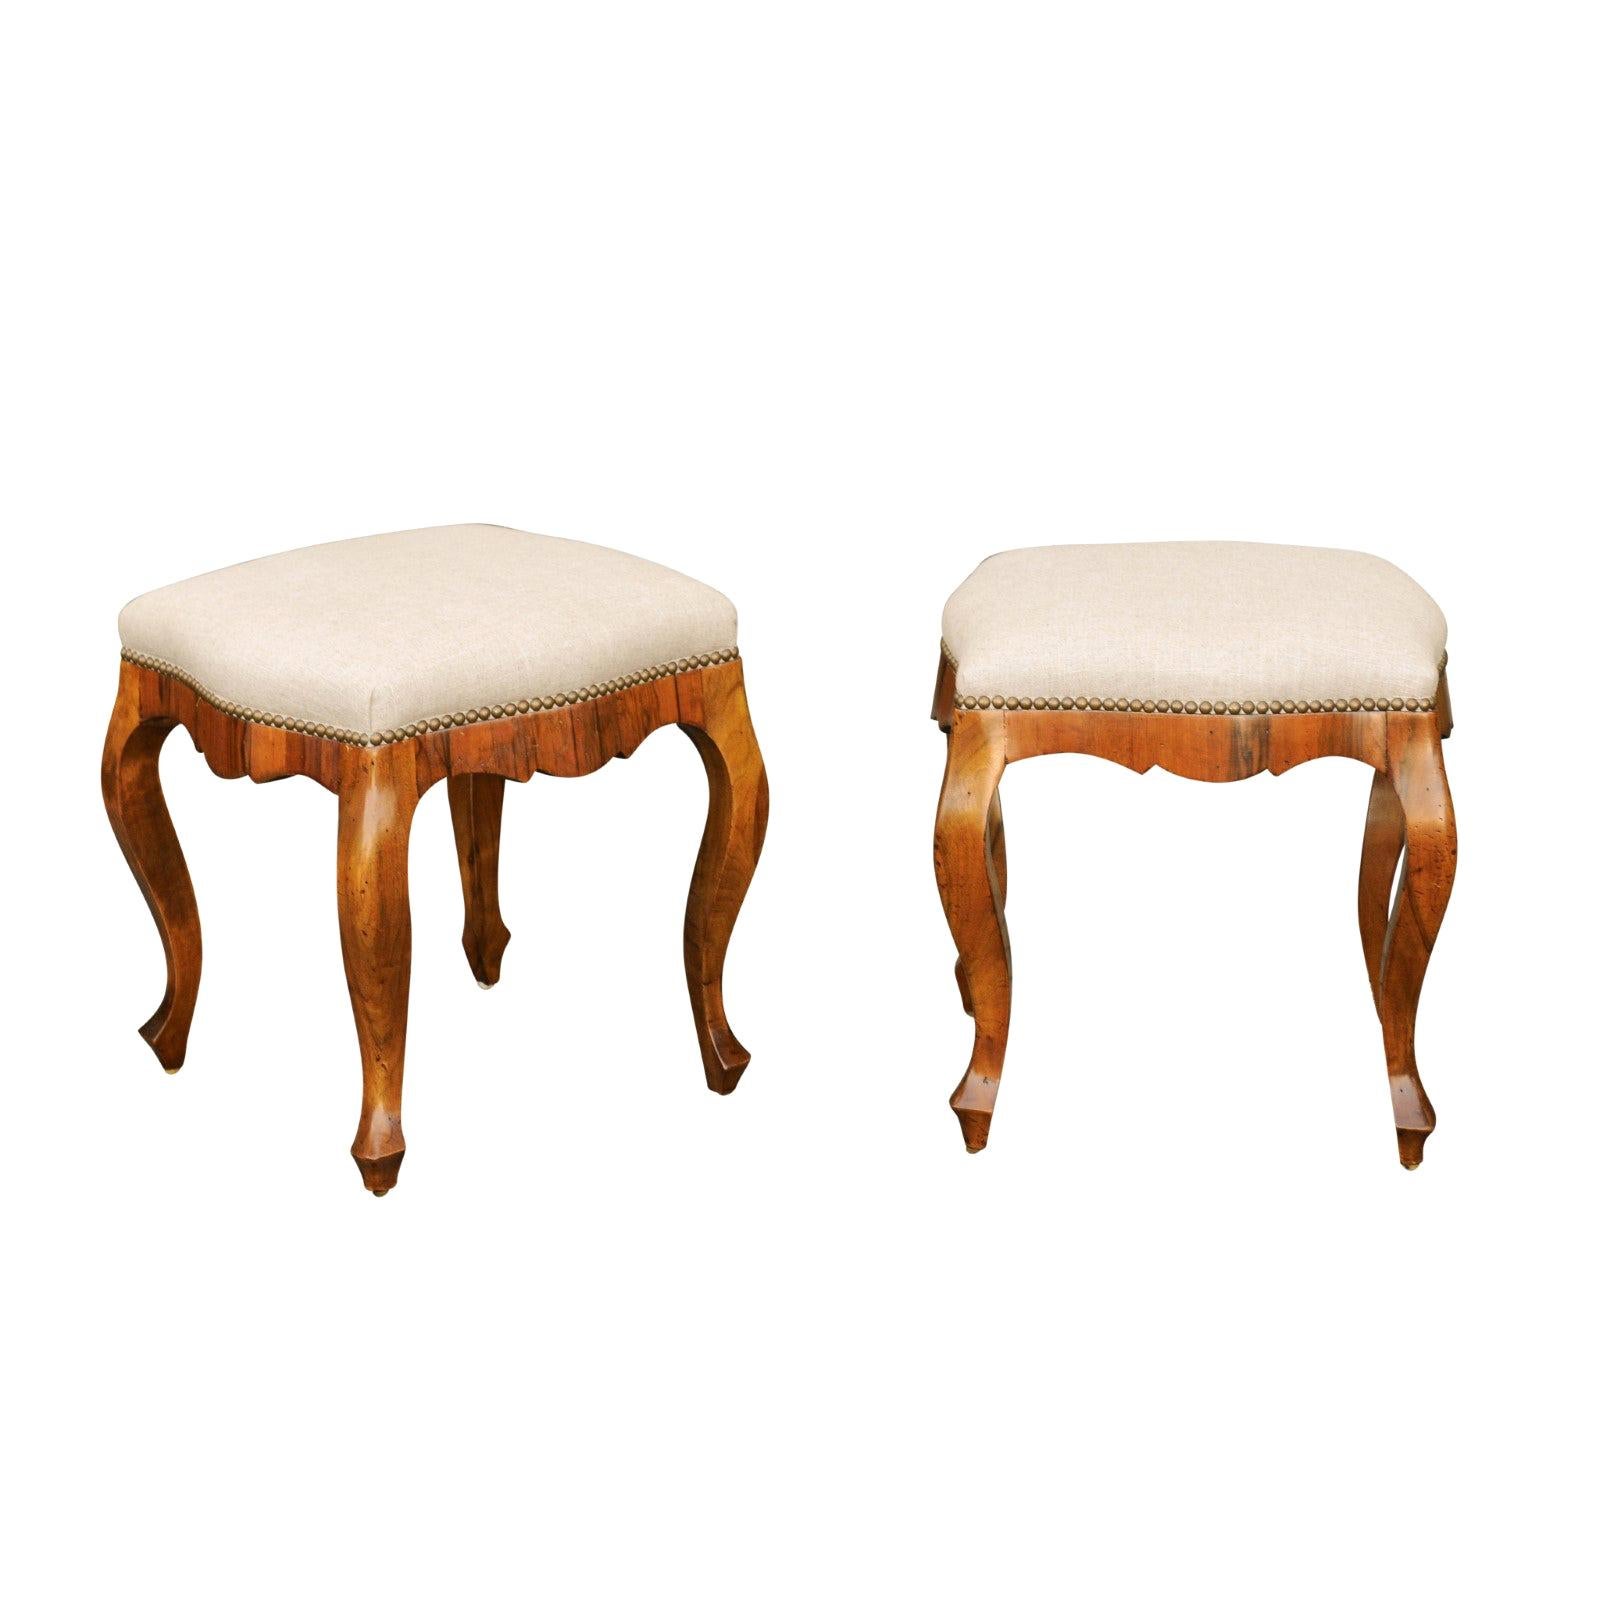 Pair of Italian 1920s Rococo Style Olivewood Stools with Upholstered Seats